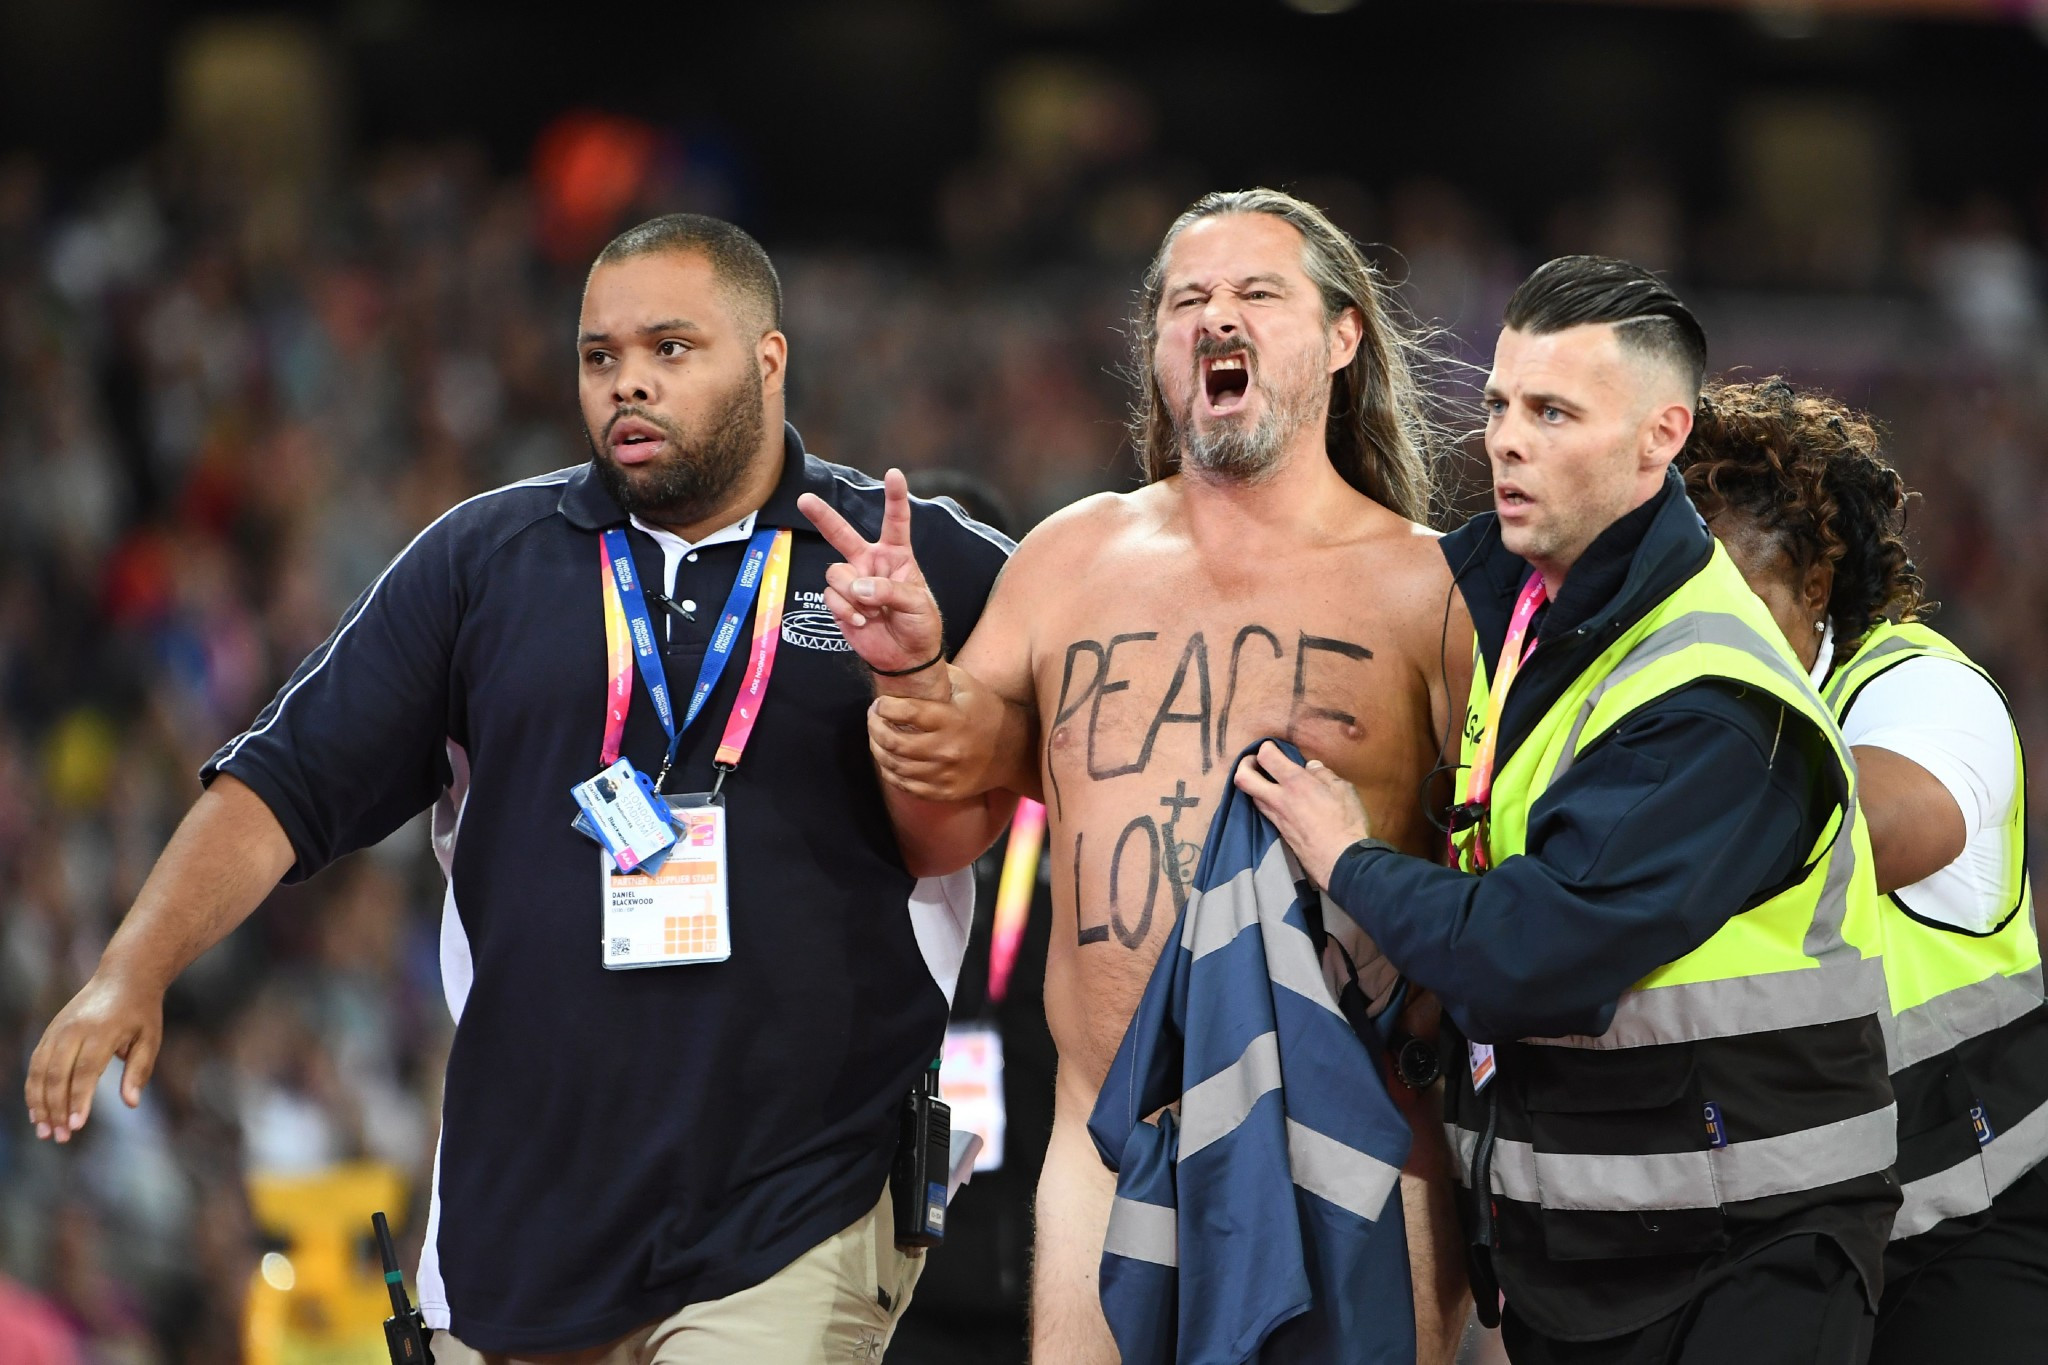 Police not to press charges against streaker who ran down track at IAAF World Championships